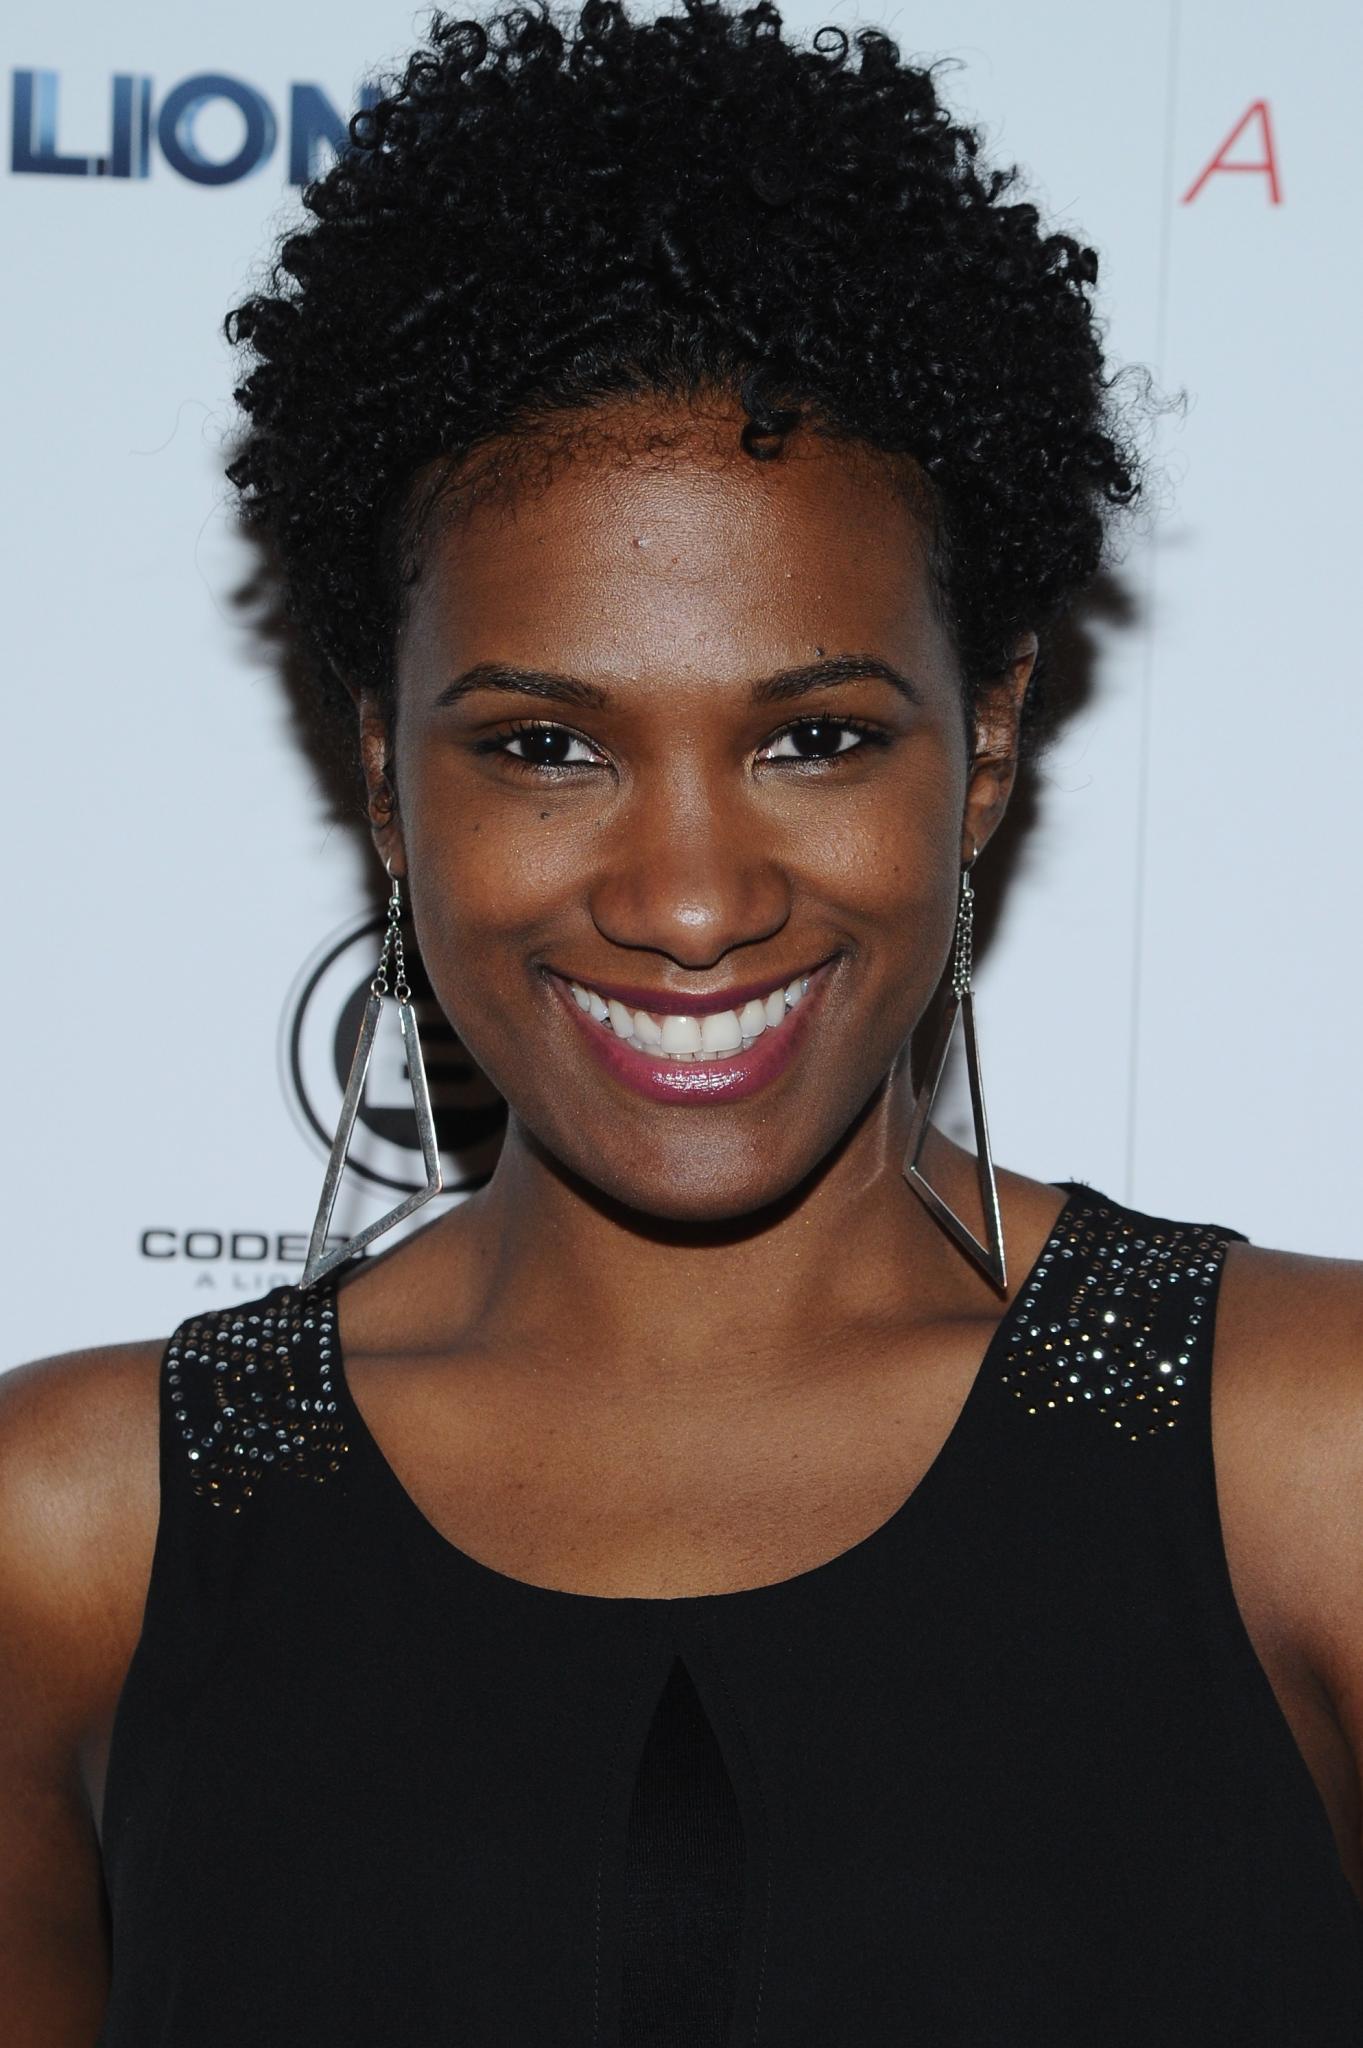 21 Things To Know About The Cast of 'Orange Is The New Black'
